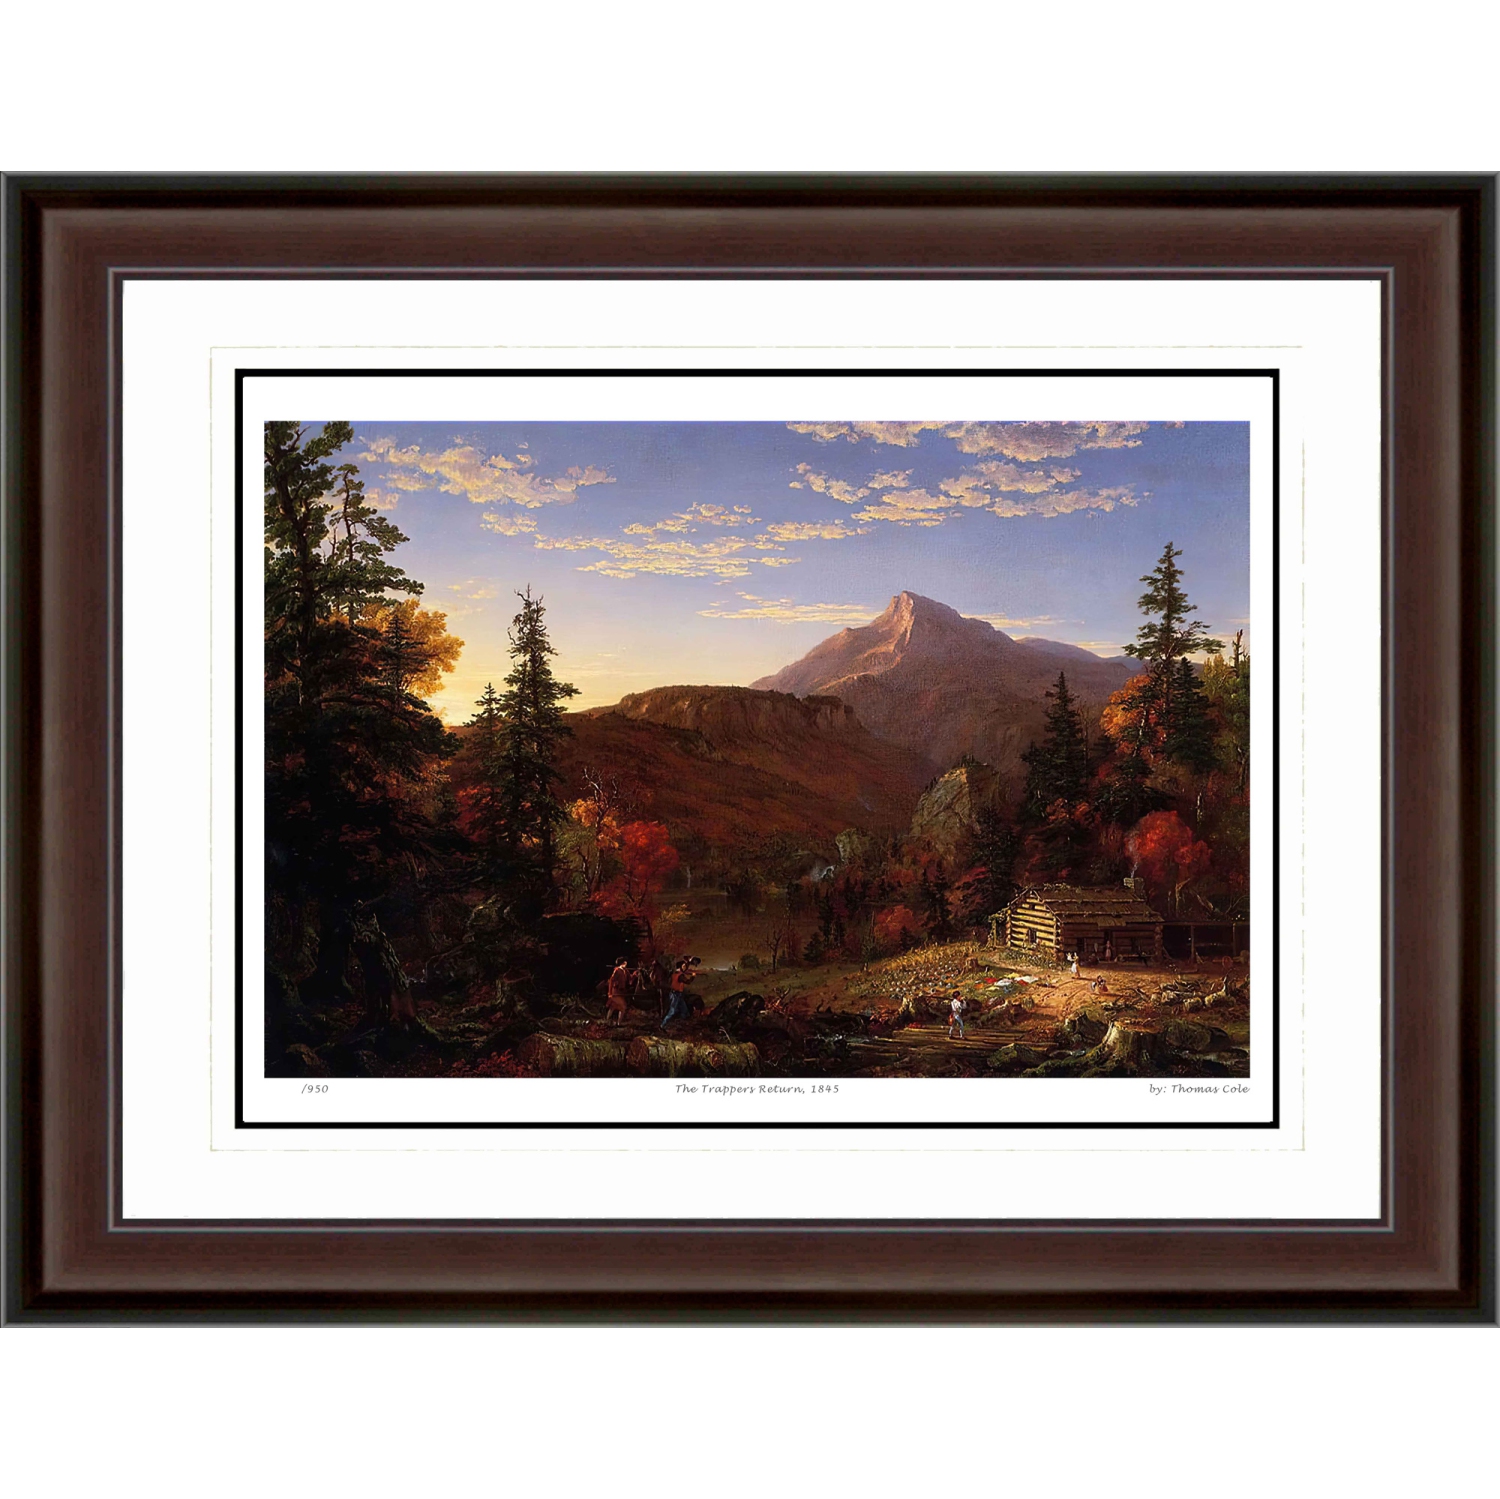 Thomas Cole "The Trappers Return, 1845" Print